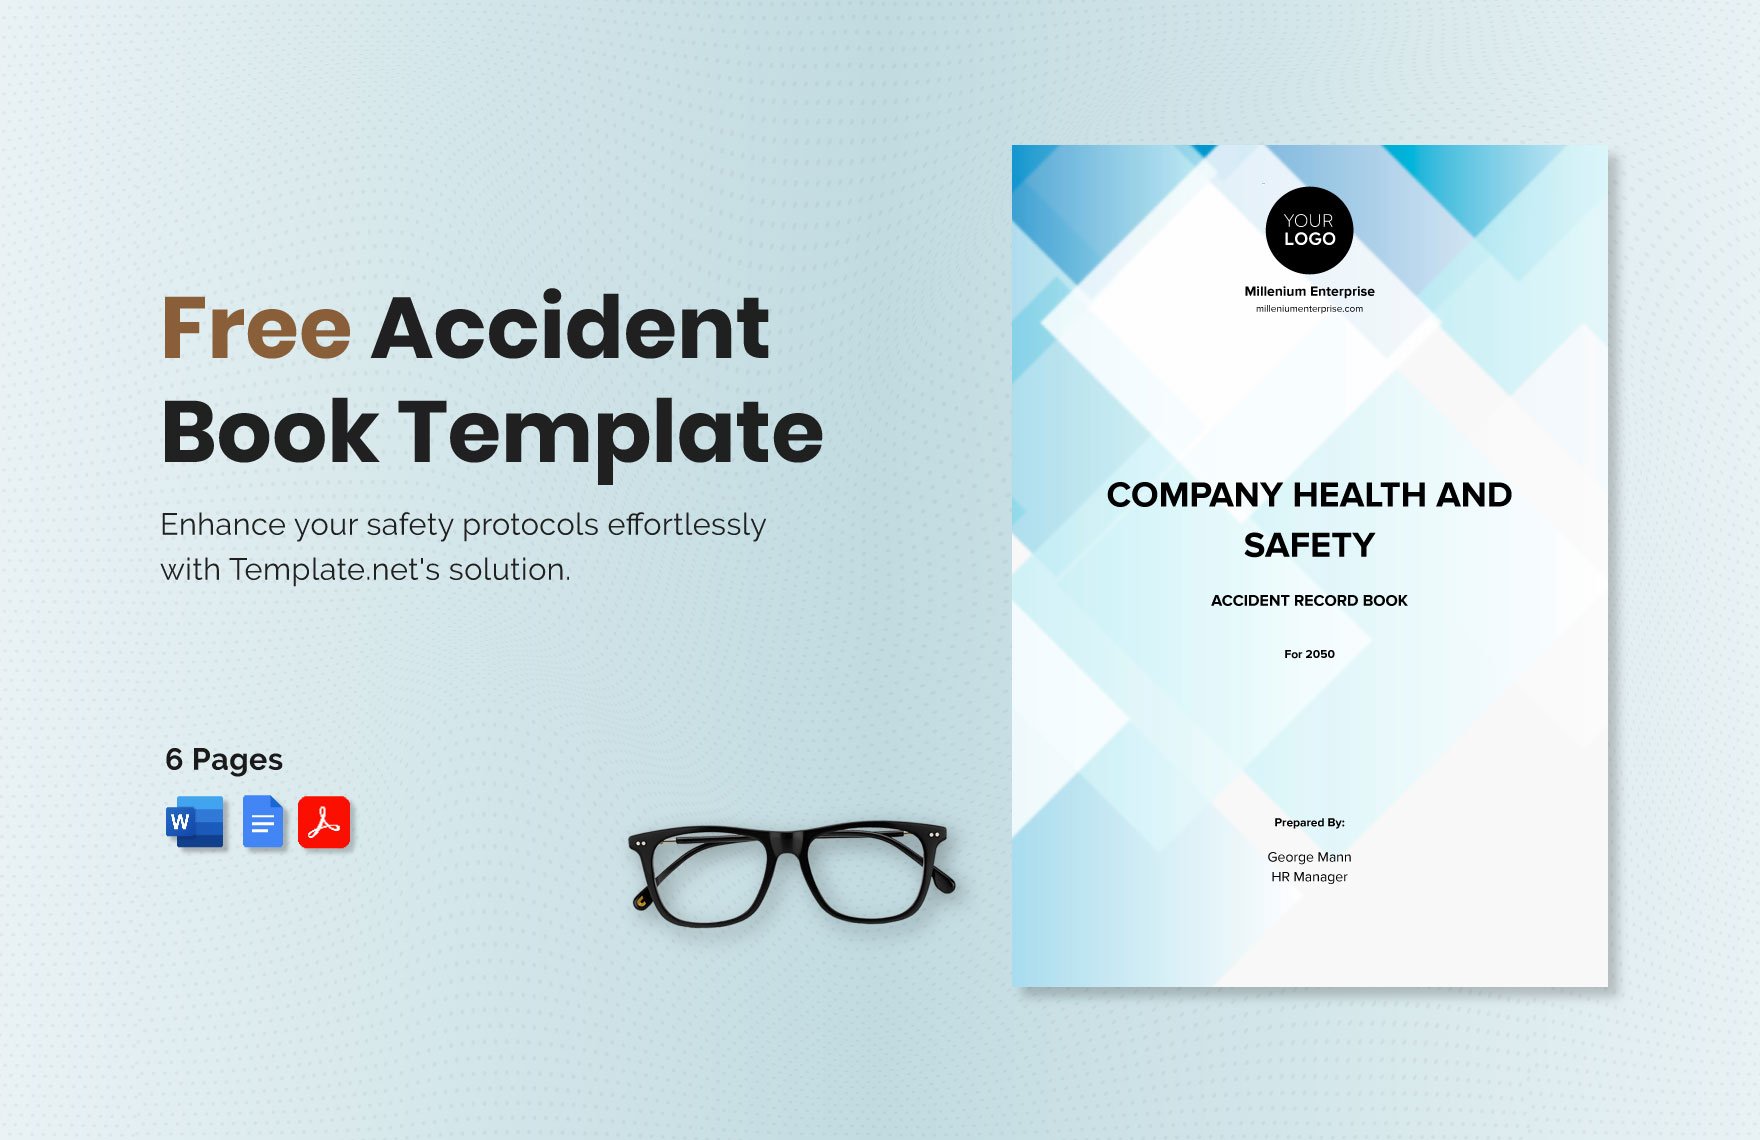 Accident Book Template